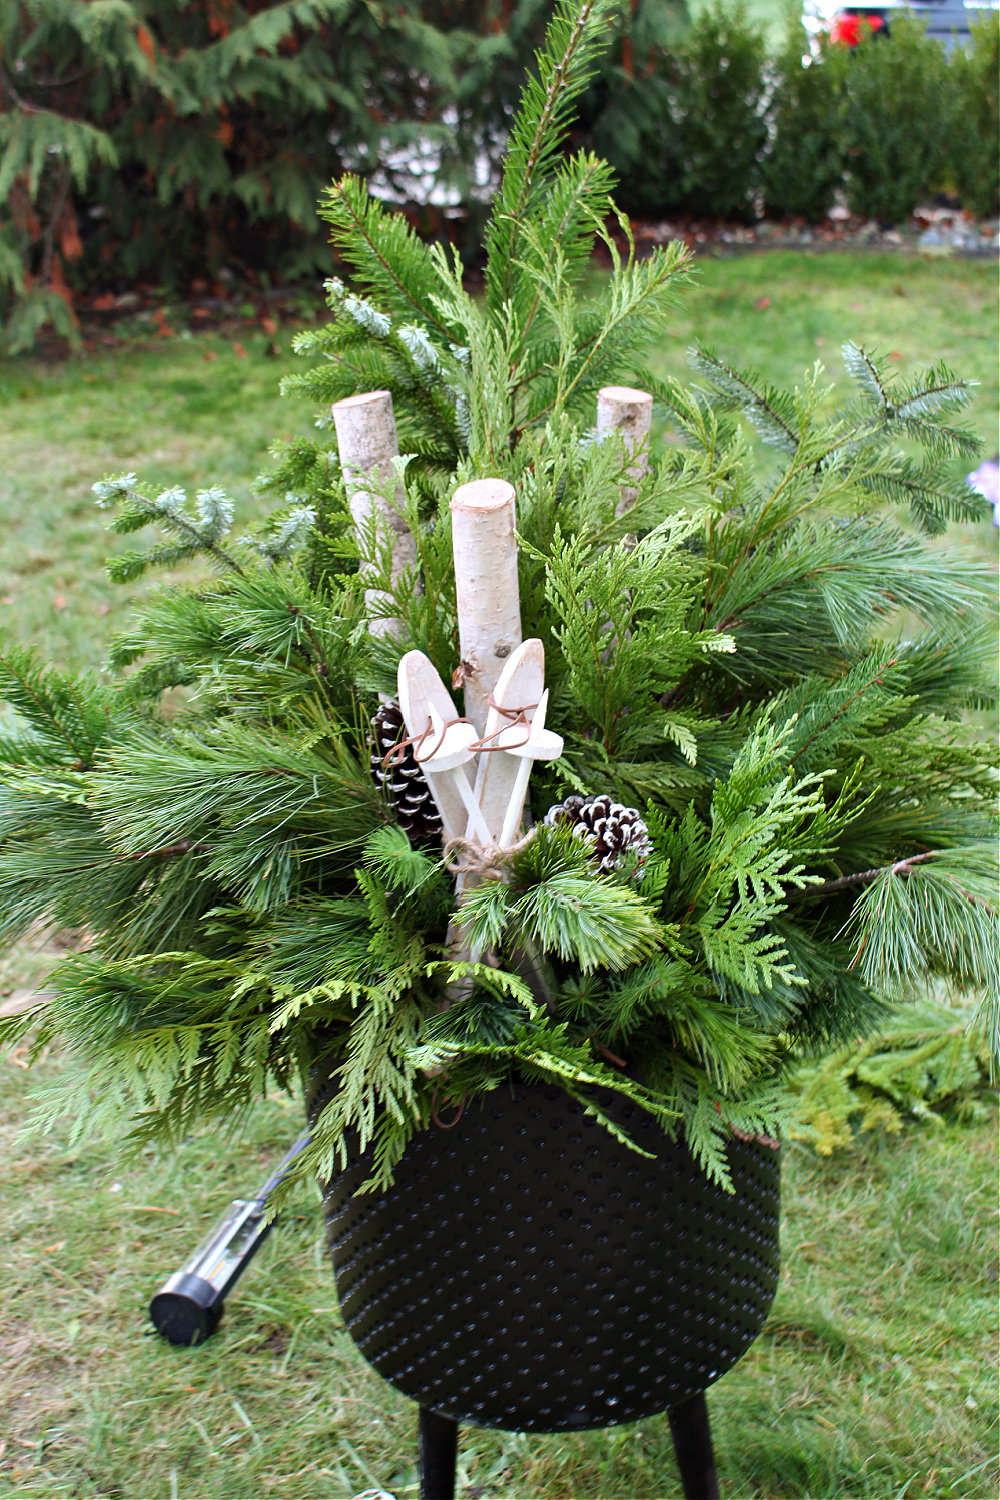 Outdoor Christmas planter with fresh greenery, wood skis, and pine cones.